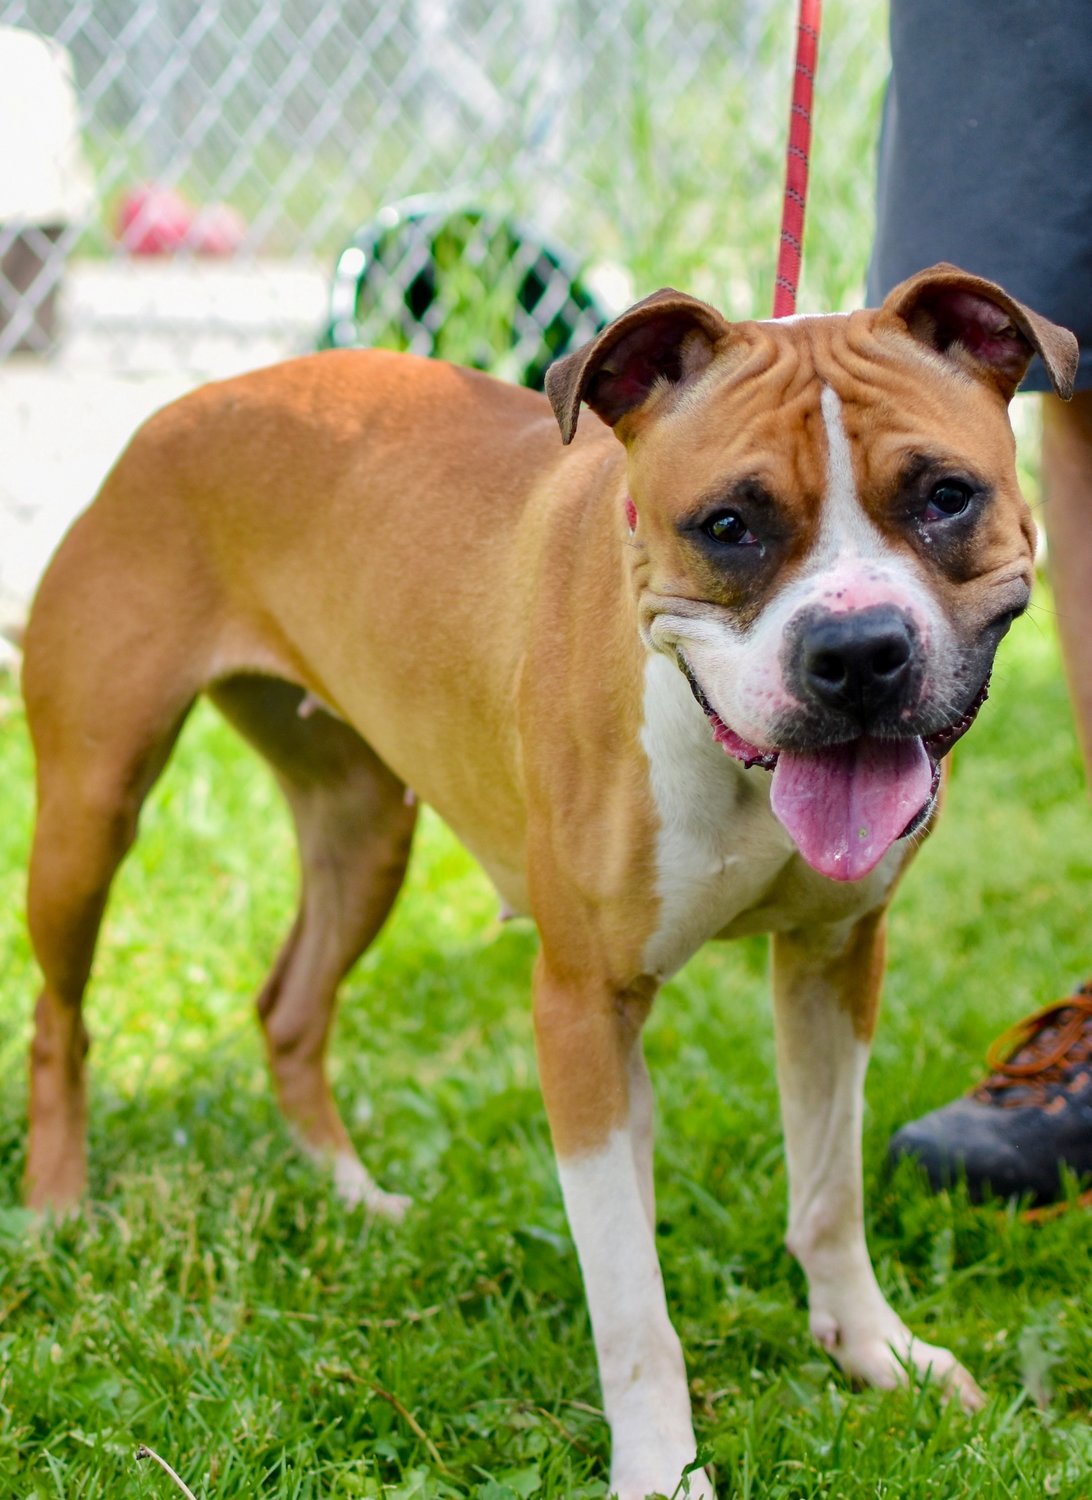 Meet Peggy! She is a 2-year-old pup looking for a new home. Peggy came in as a stray and no one came looking for her. She’s a friendly, wiggly pup who loves to play! Peggy did well when tested with other dogs. She didn’t do bad with cats, but she seems to want to chase them, so a cat-free home might be best for her. She is spayed, current on vaccines, and microchipped. Her adoption fee is $120.  Stop in to meet Peggy today or apply here to adopt: www.anitas-sshs.org/adopt/apply/Dog. Anita’s Stevens-Swan Humane Society, 5664 Horatio St., Utica, 315-738-4357, www.anitas-sshs.org.